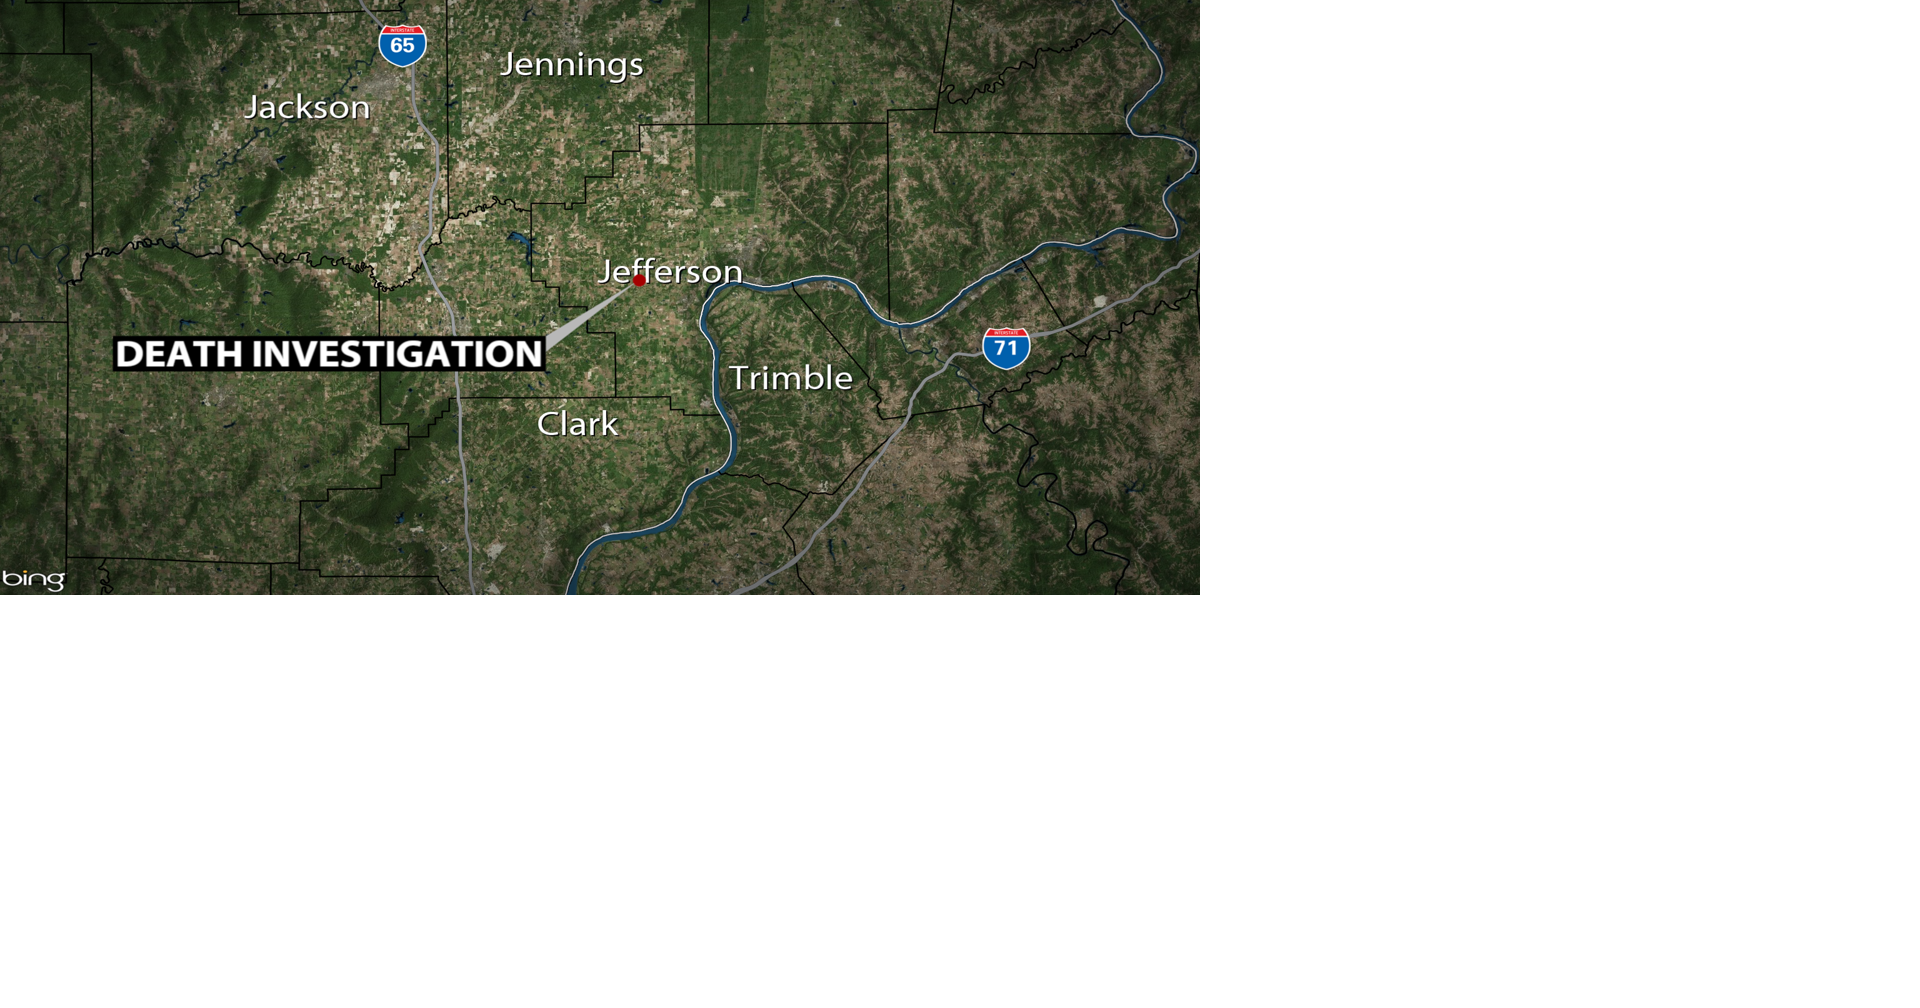 Police investigating death in Southern Indiana